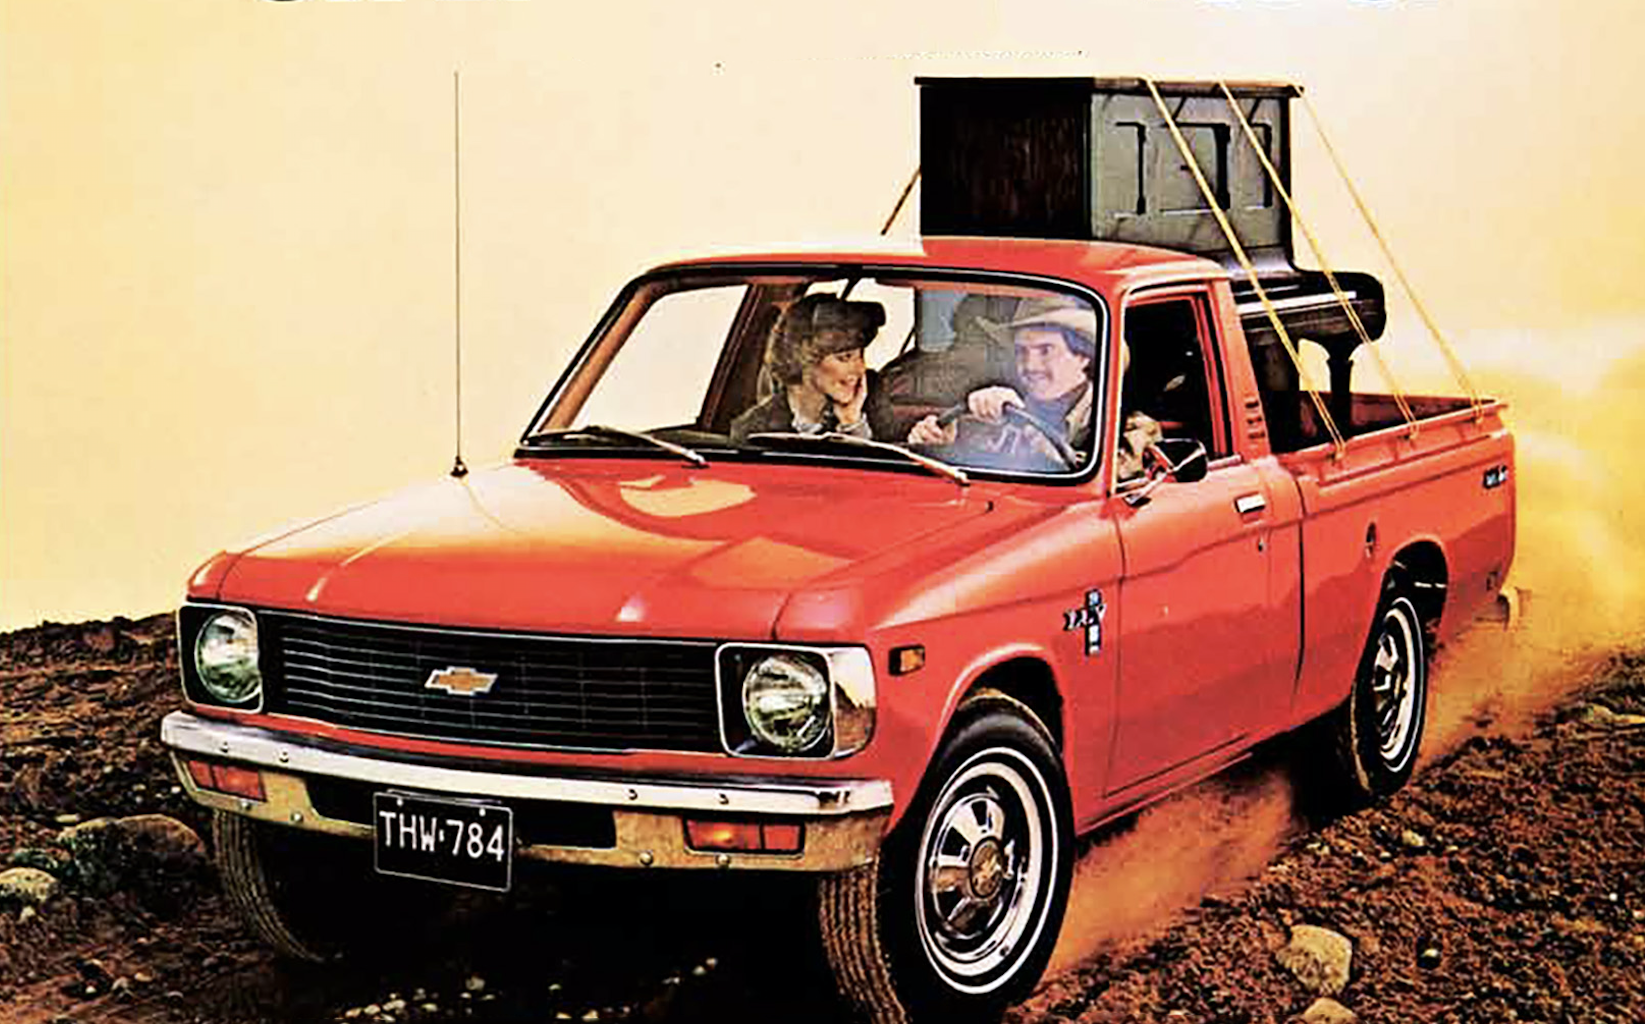 Compact Madness! A Gallery of SmallTruck Ads